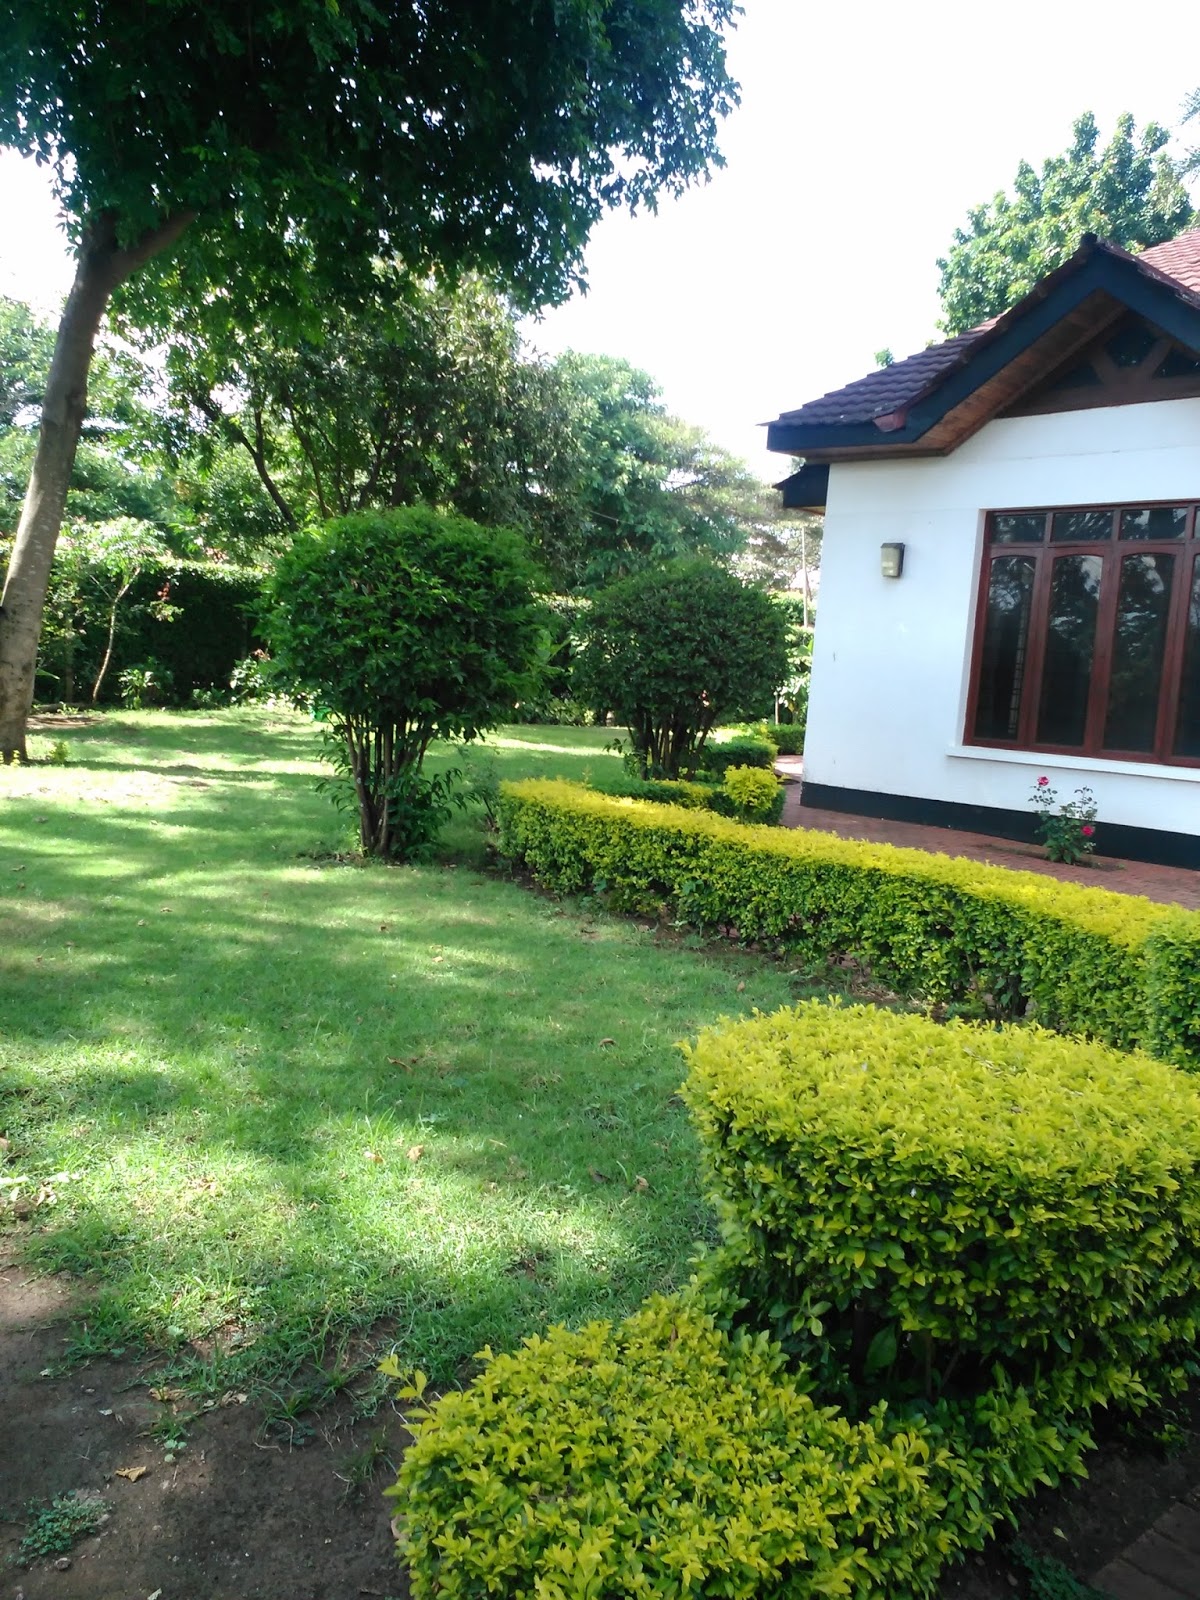 rent house in tanzania arusha rent houses, houses for sale